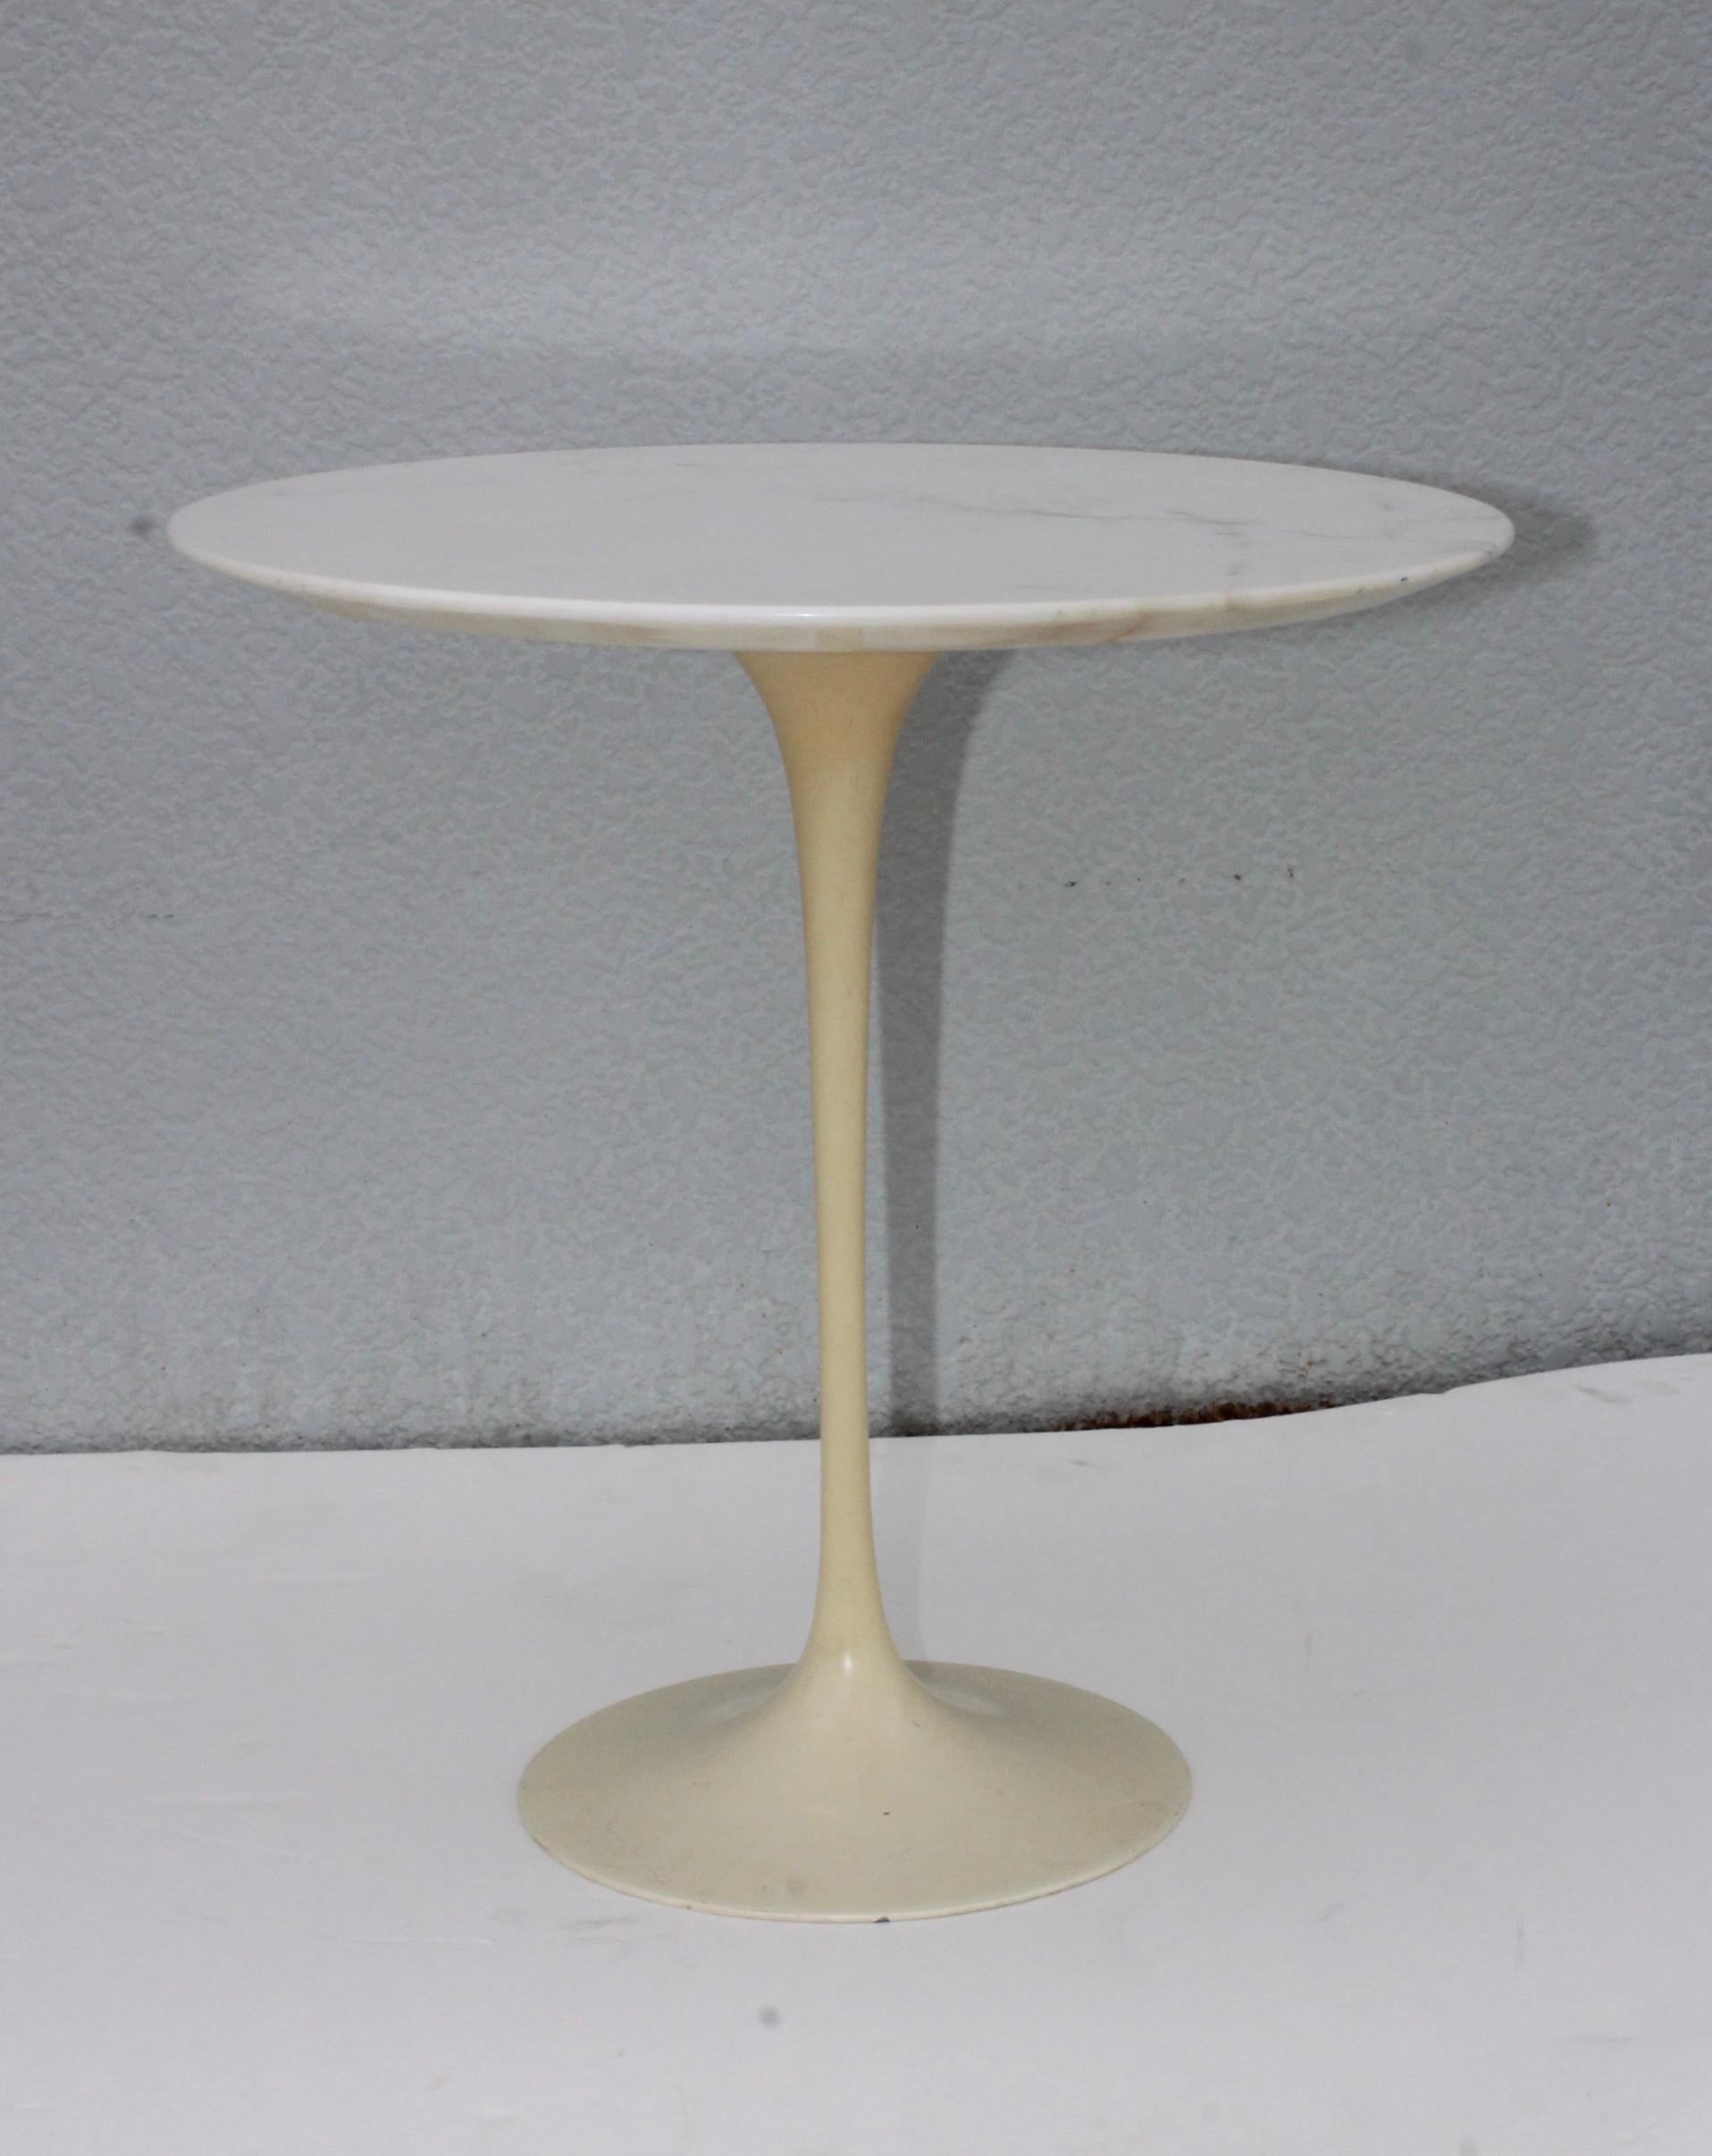 1960s Italian Carrara marble top with tulip base end table designed by Eero Saarinen for Knoll.